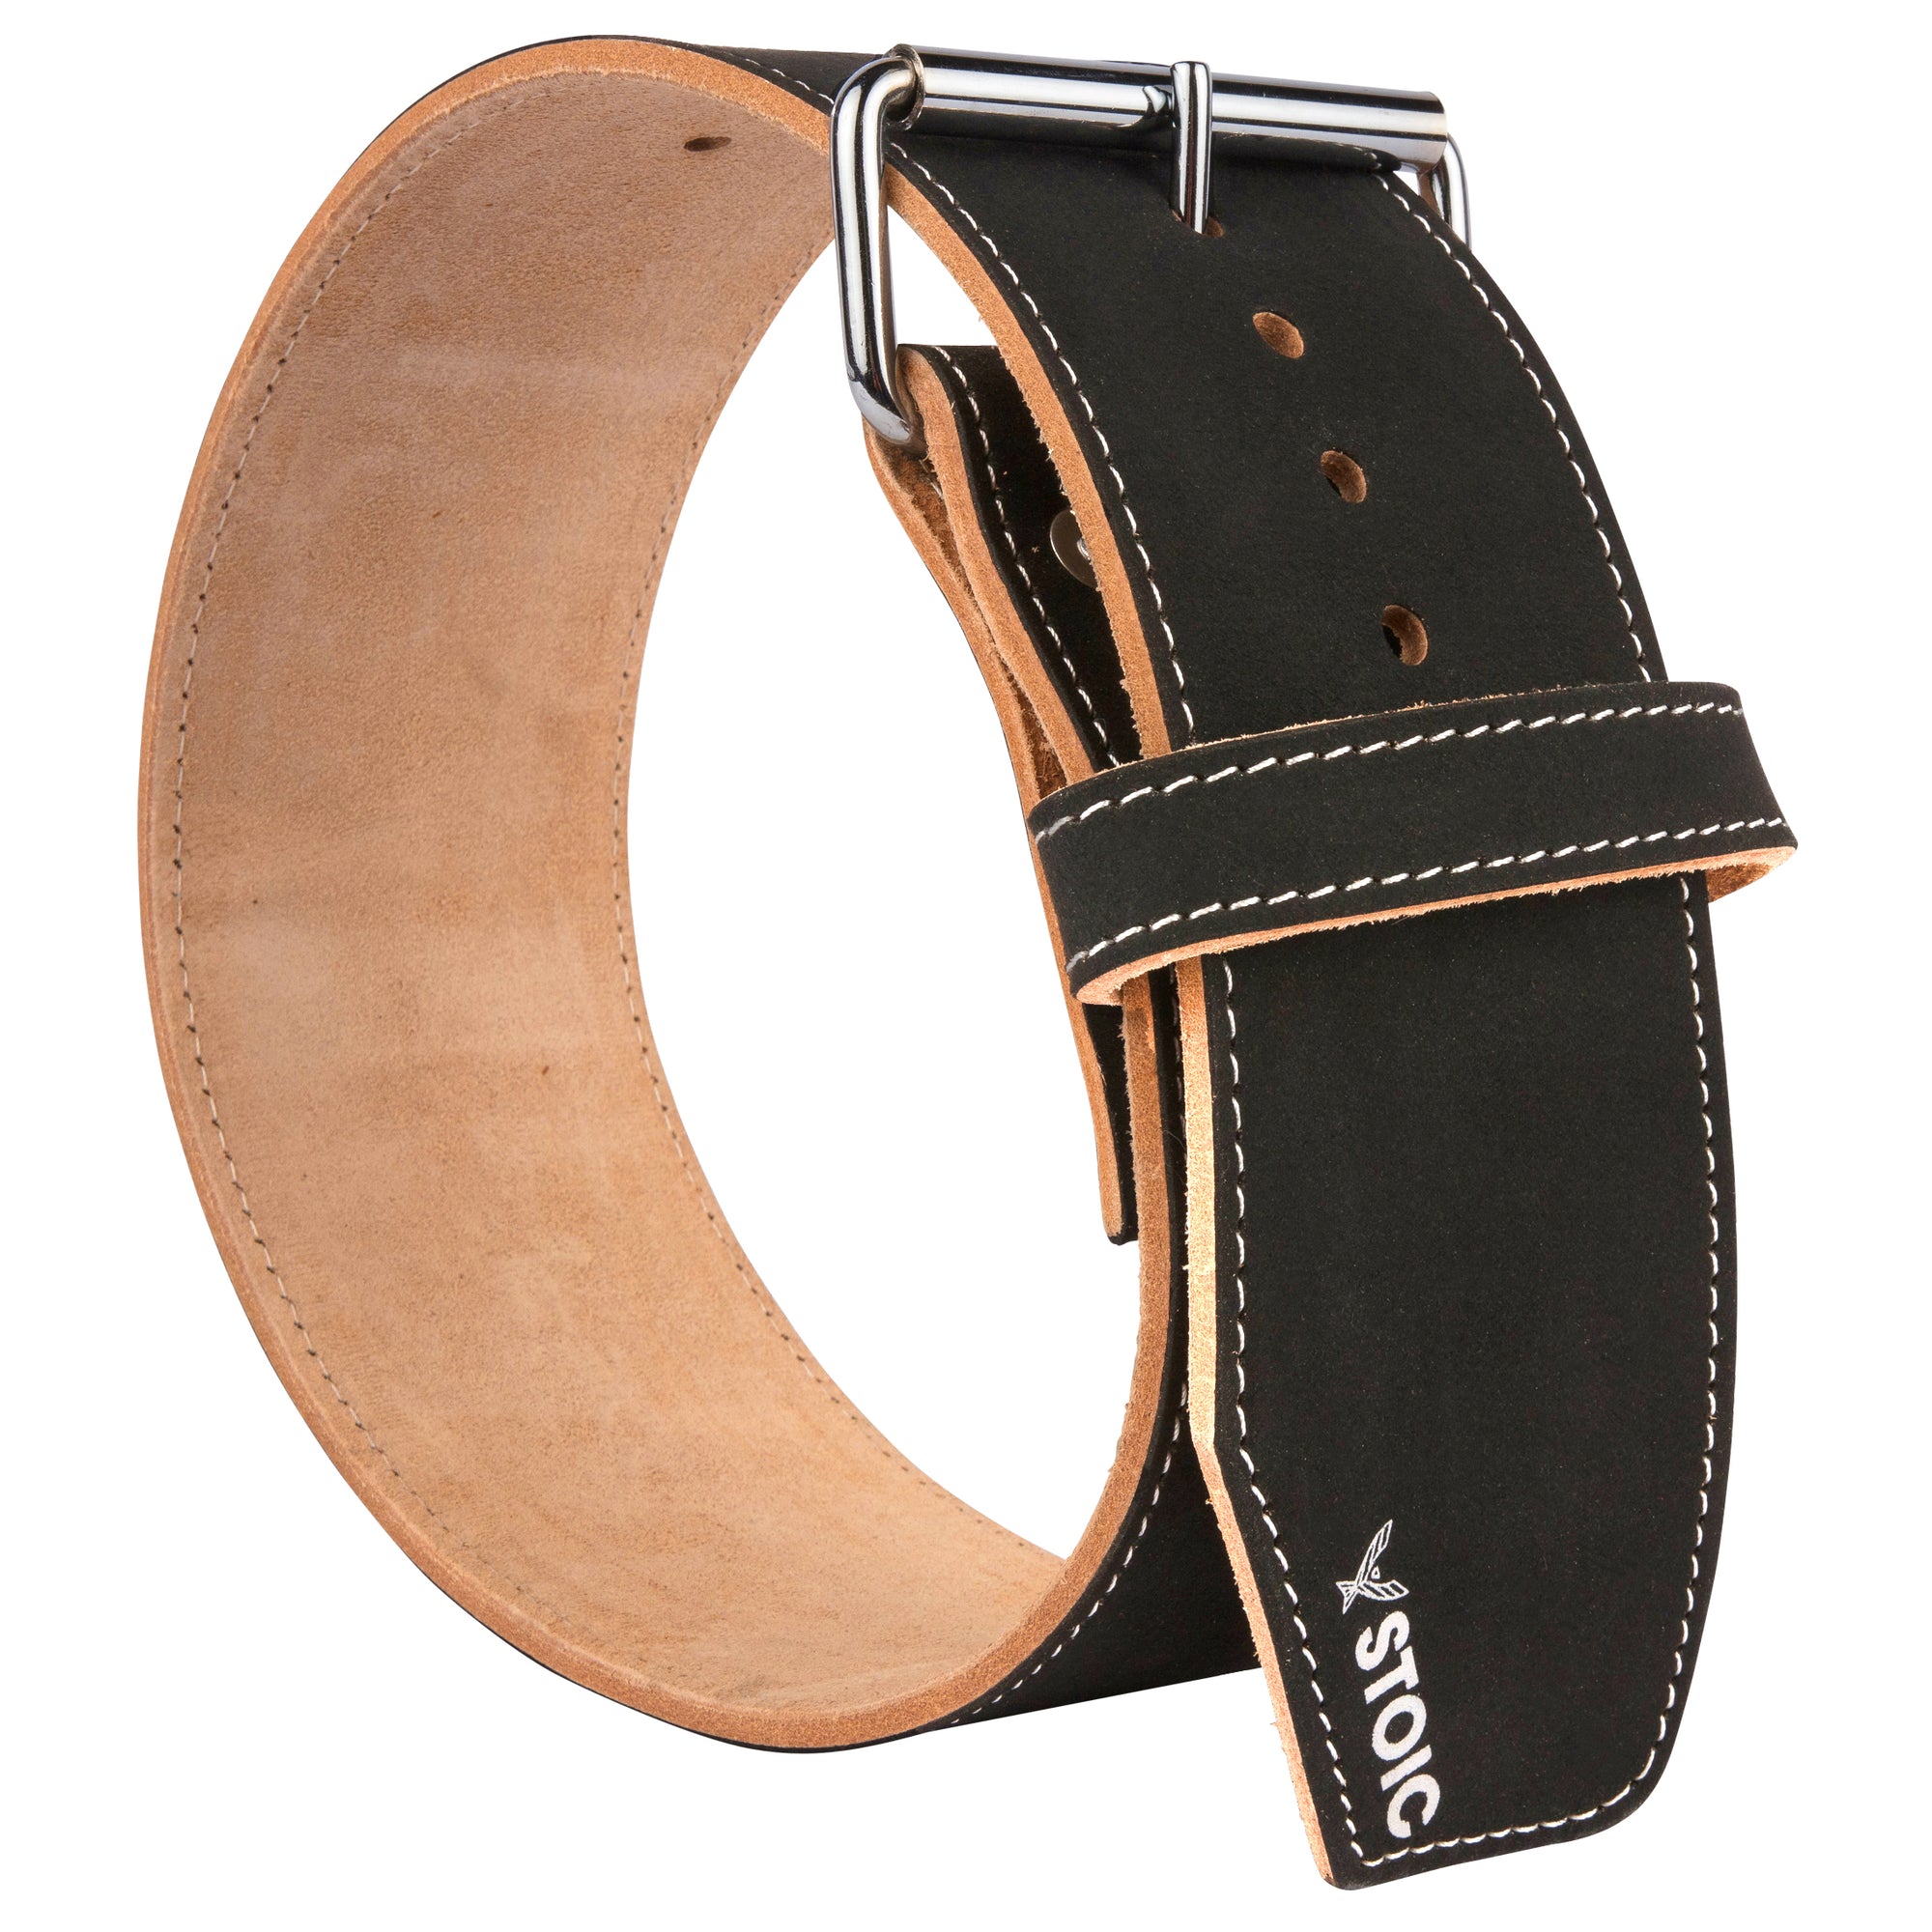 Stoic Weightlifting Prong Belt (6.5mm)